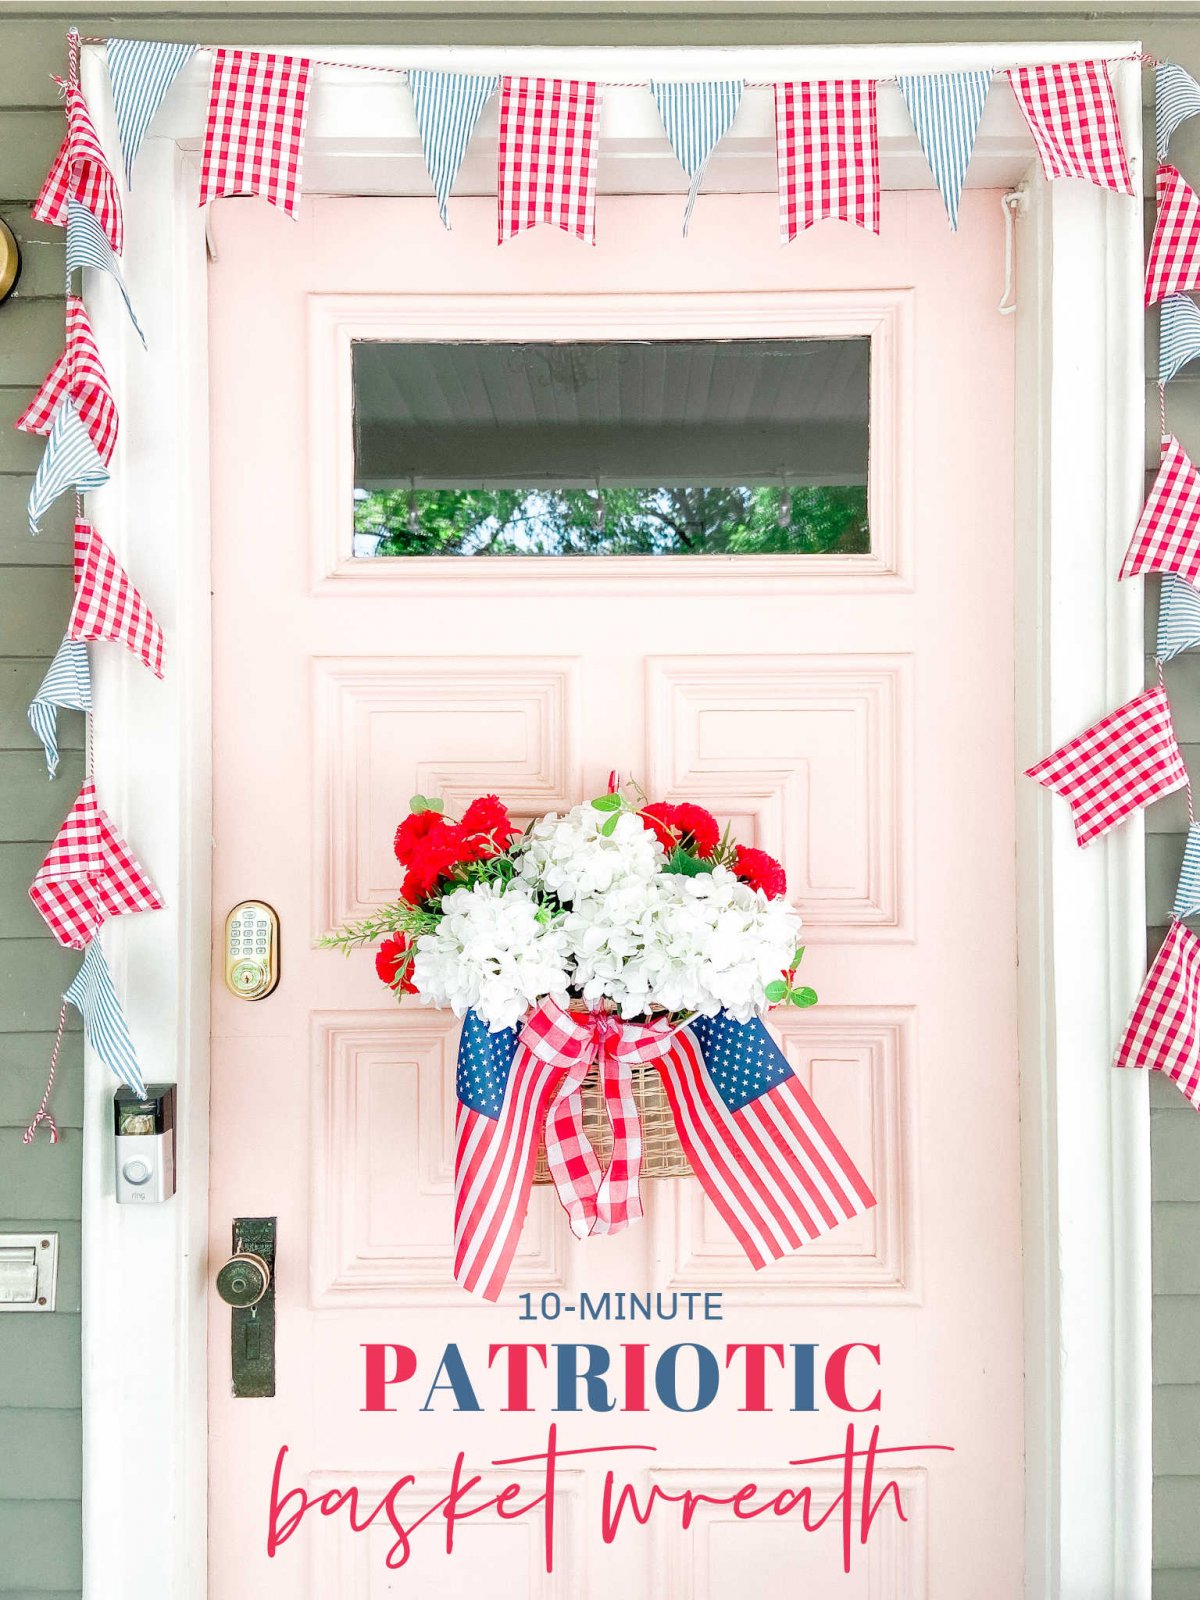 10-Minute Patriotic Basket Wreath. Make an easy and festive fourth of july wreath in just minutes! 